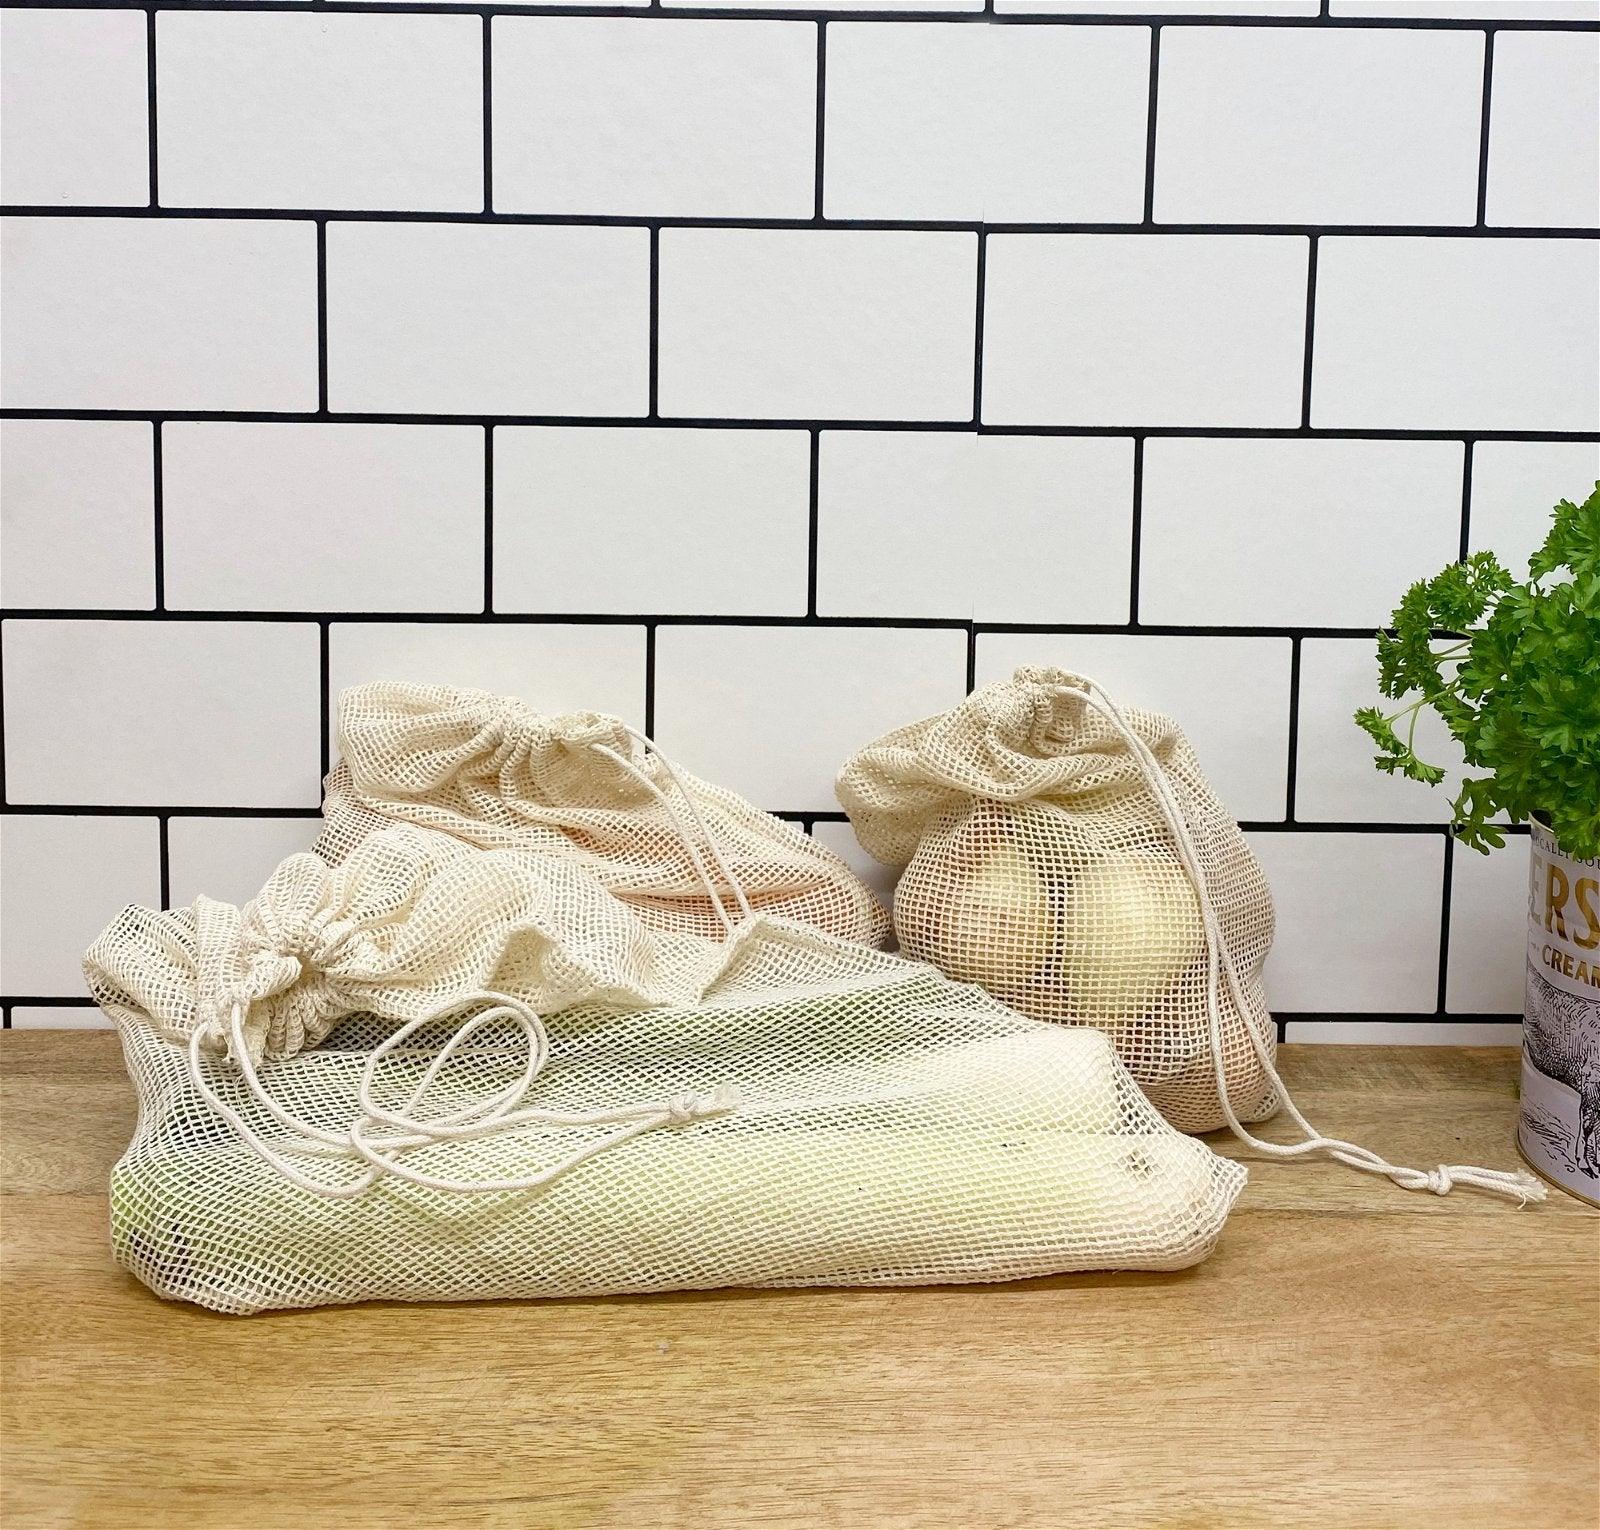 View Pack of 3 Reusable Fruit Vegetable Bags information